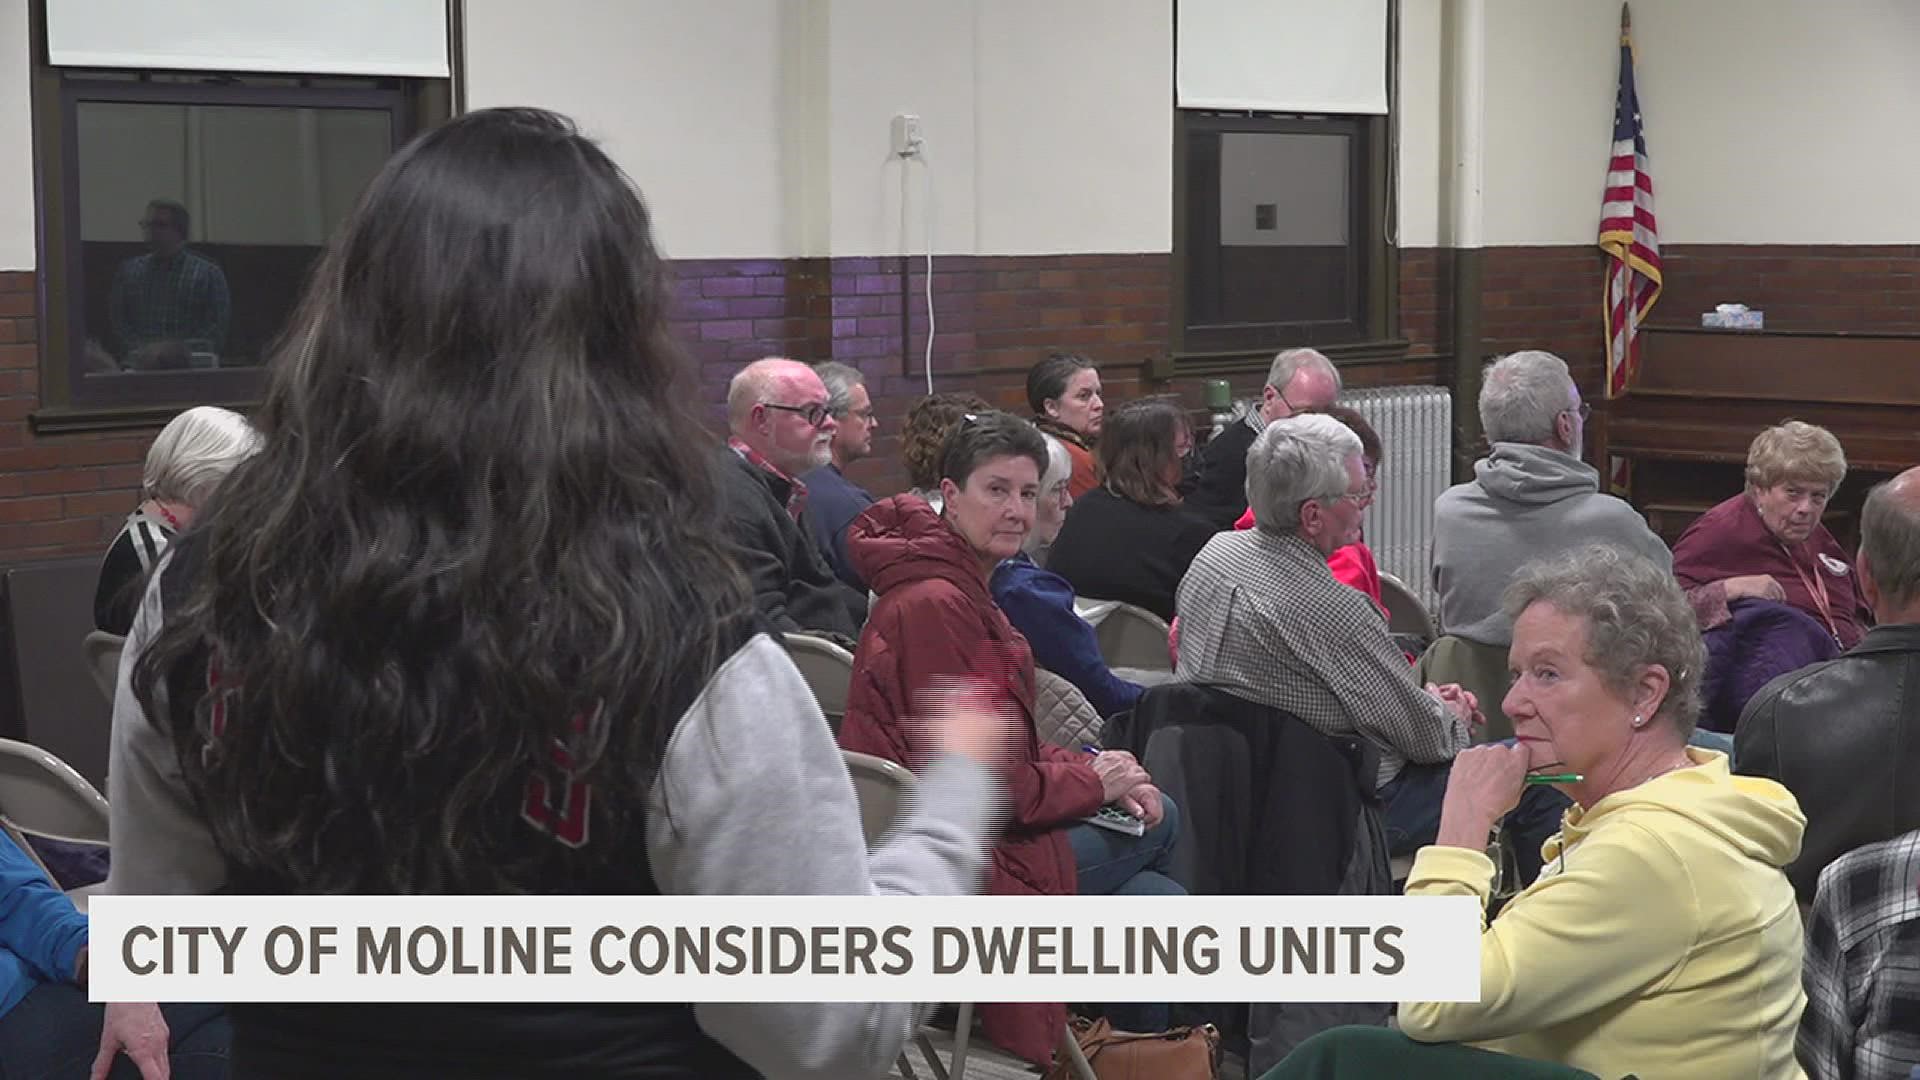 The City is taking public comments on a new Accessory Dwelling Unit, or "granny flat" ordinance, which would give elderly residents an alternative to nursing homes.